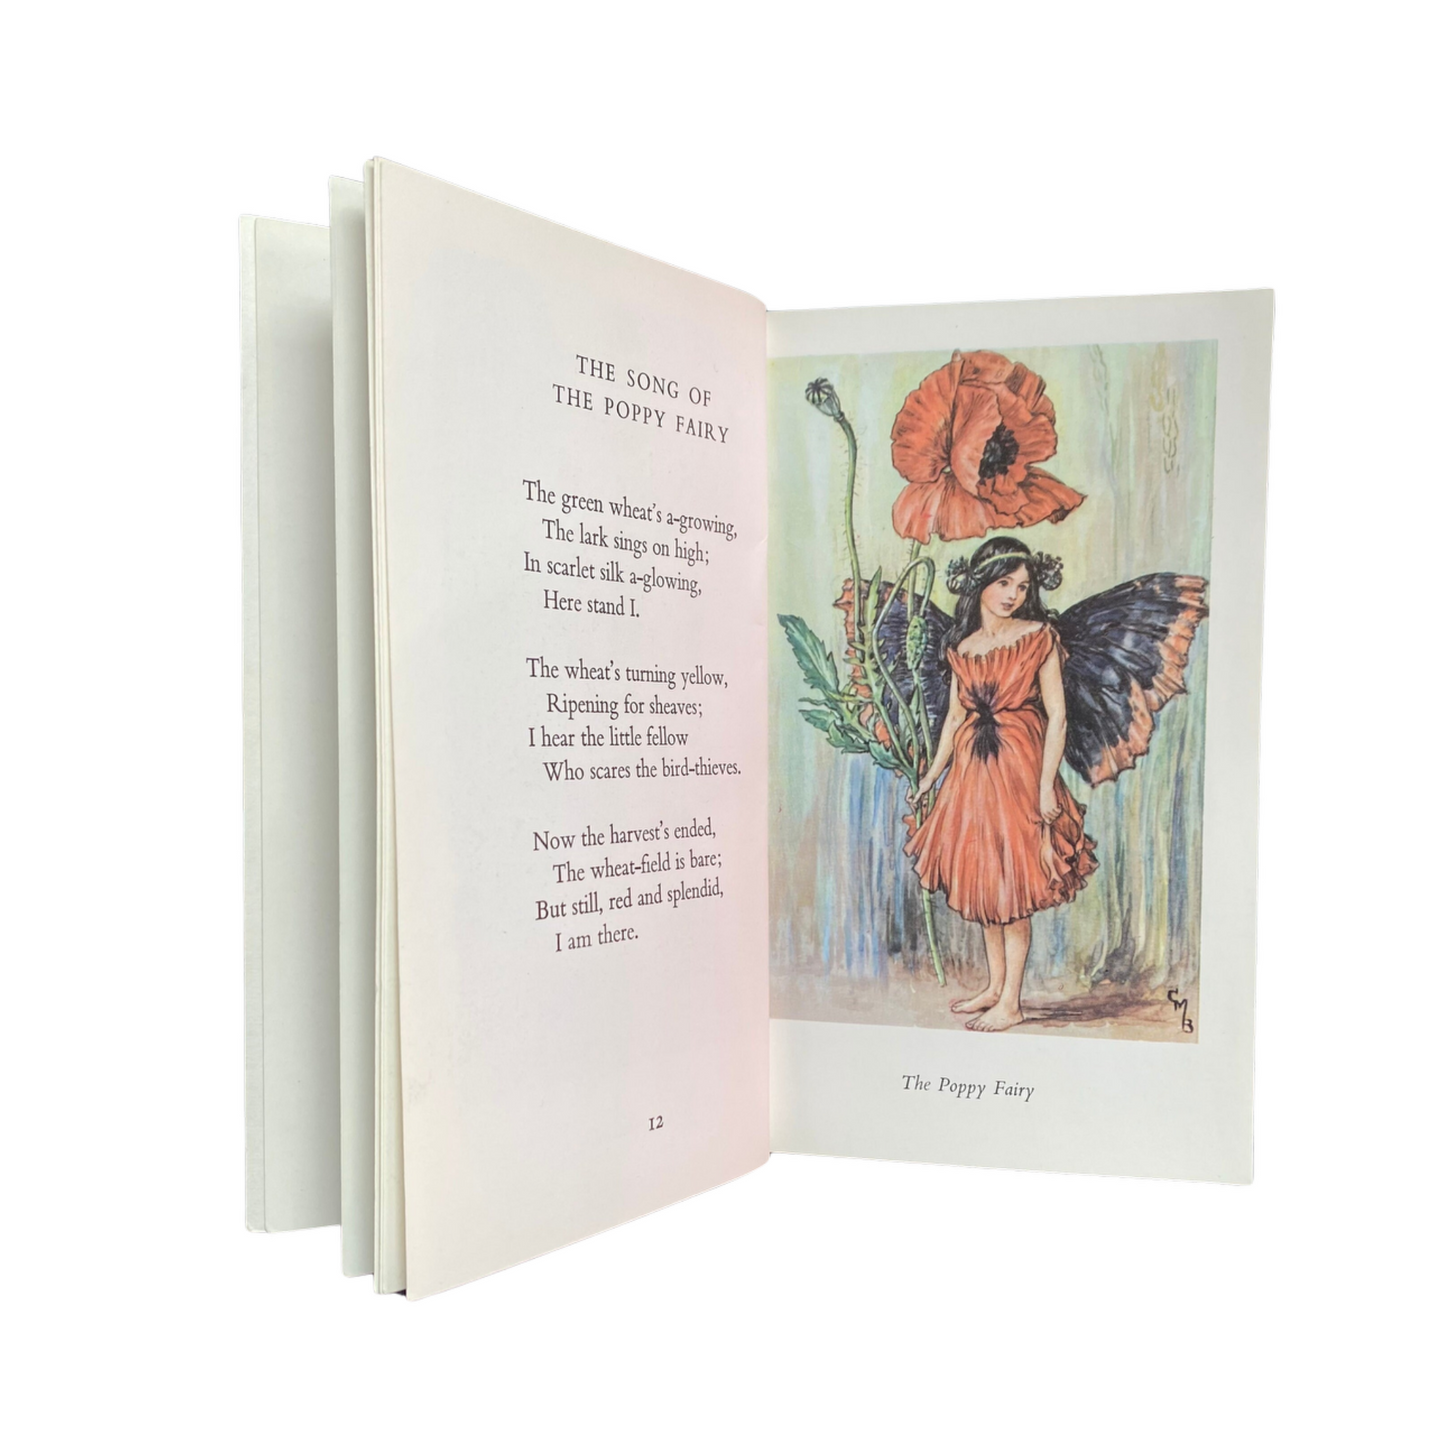 Flower Fairies of the Summer, 1970s edition by Cicely M Barker. Great gift idea